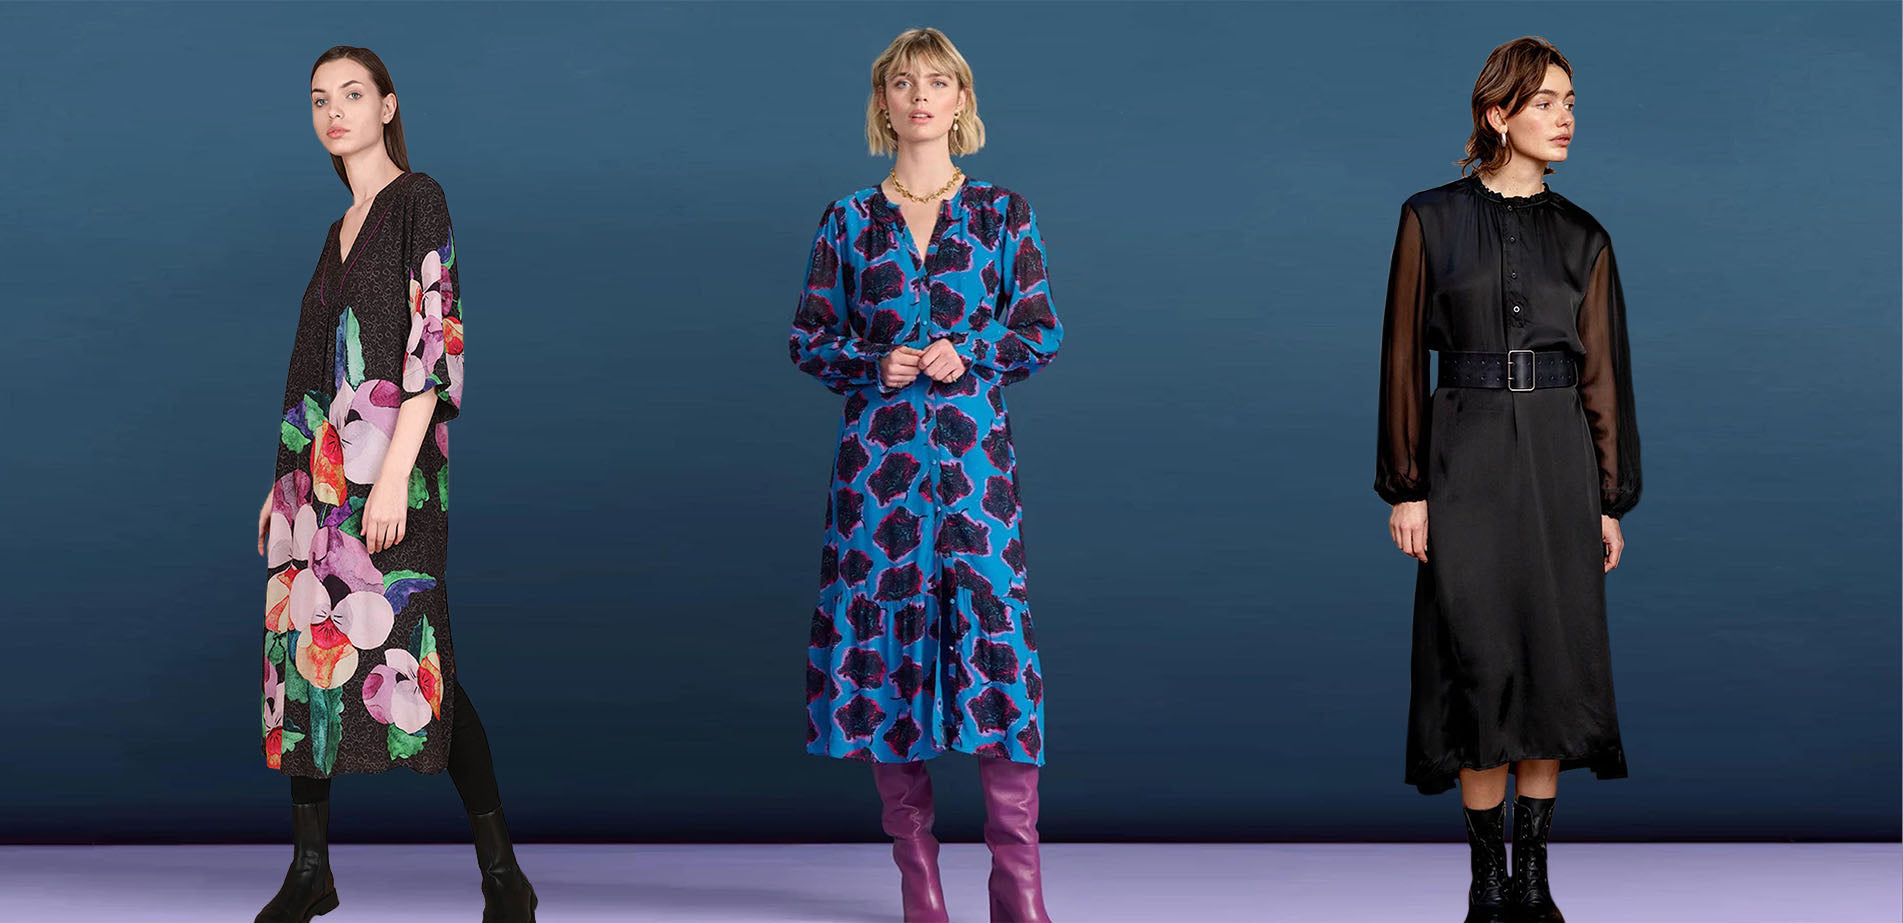 Three models wearing 3 festive dresses in from of a blue background